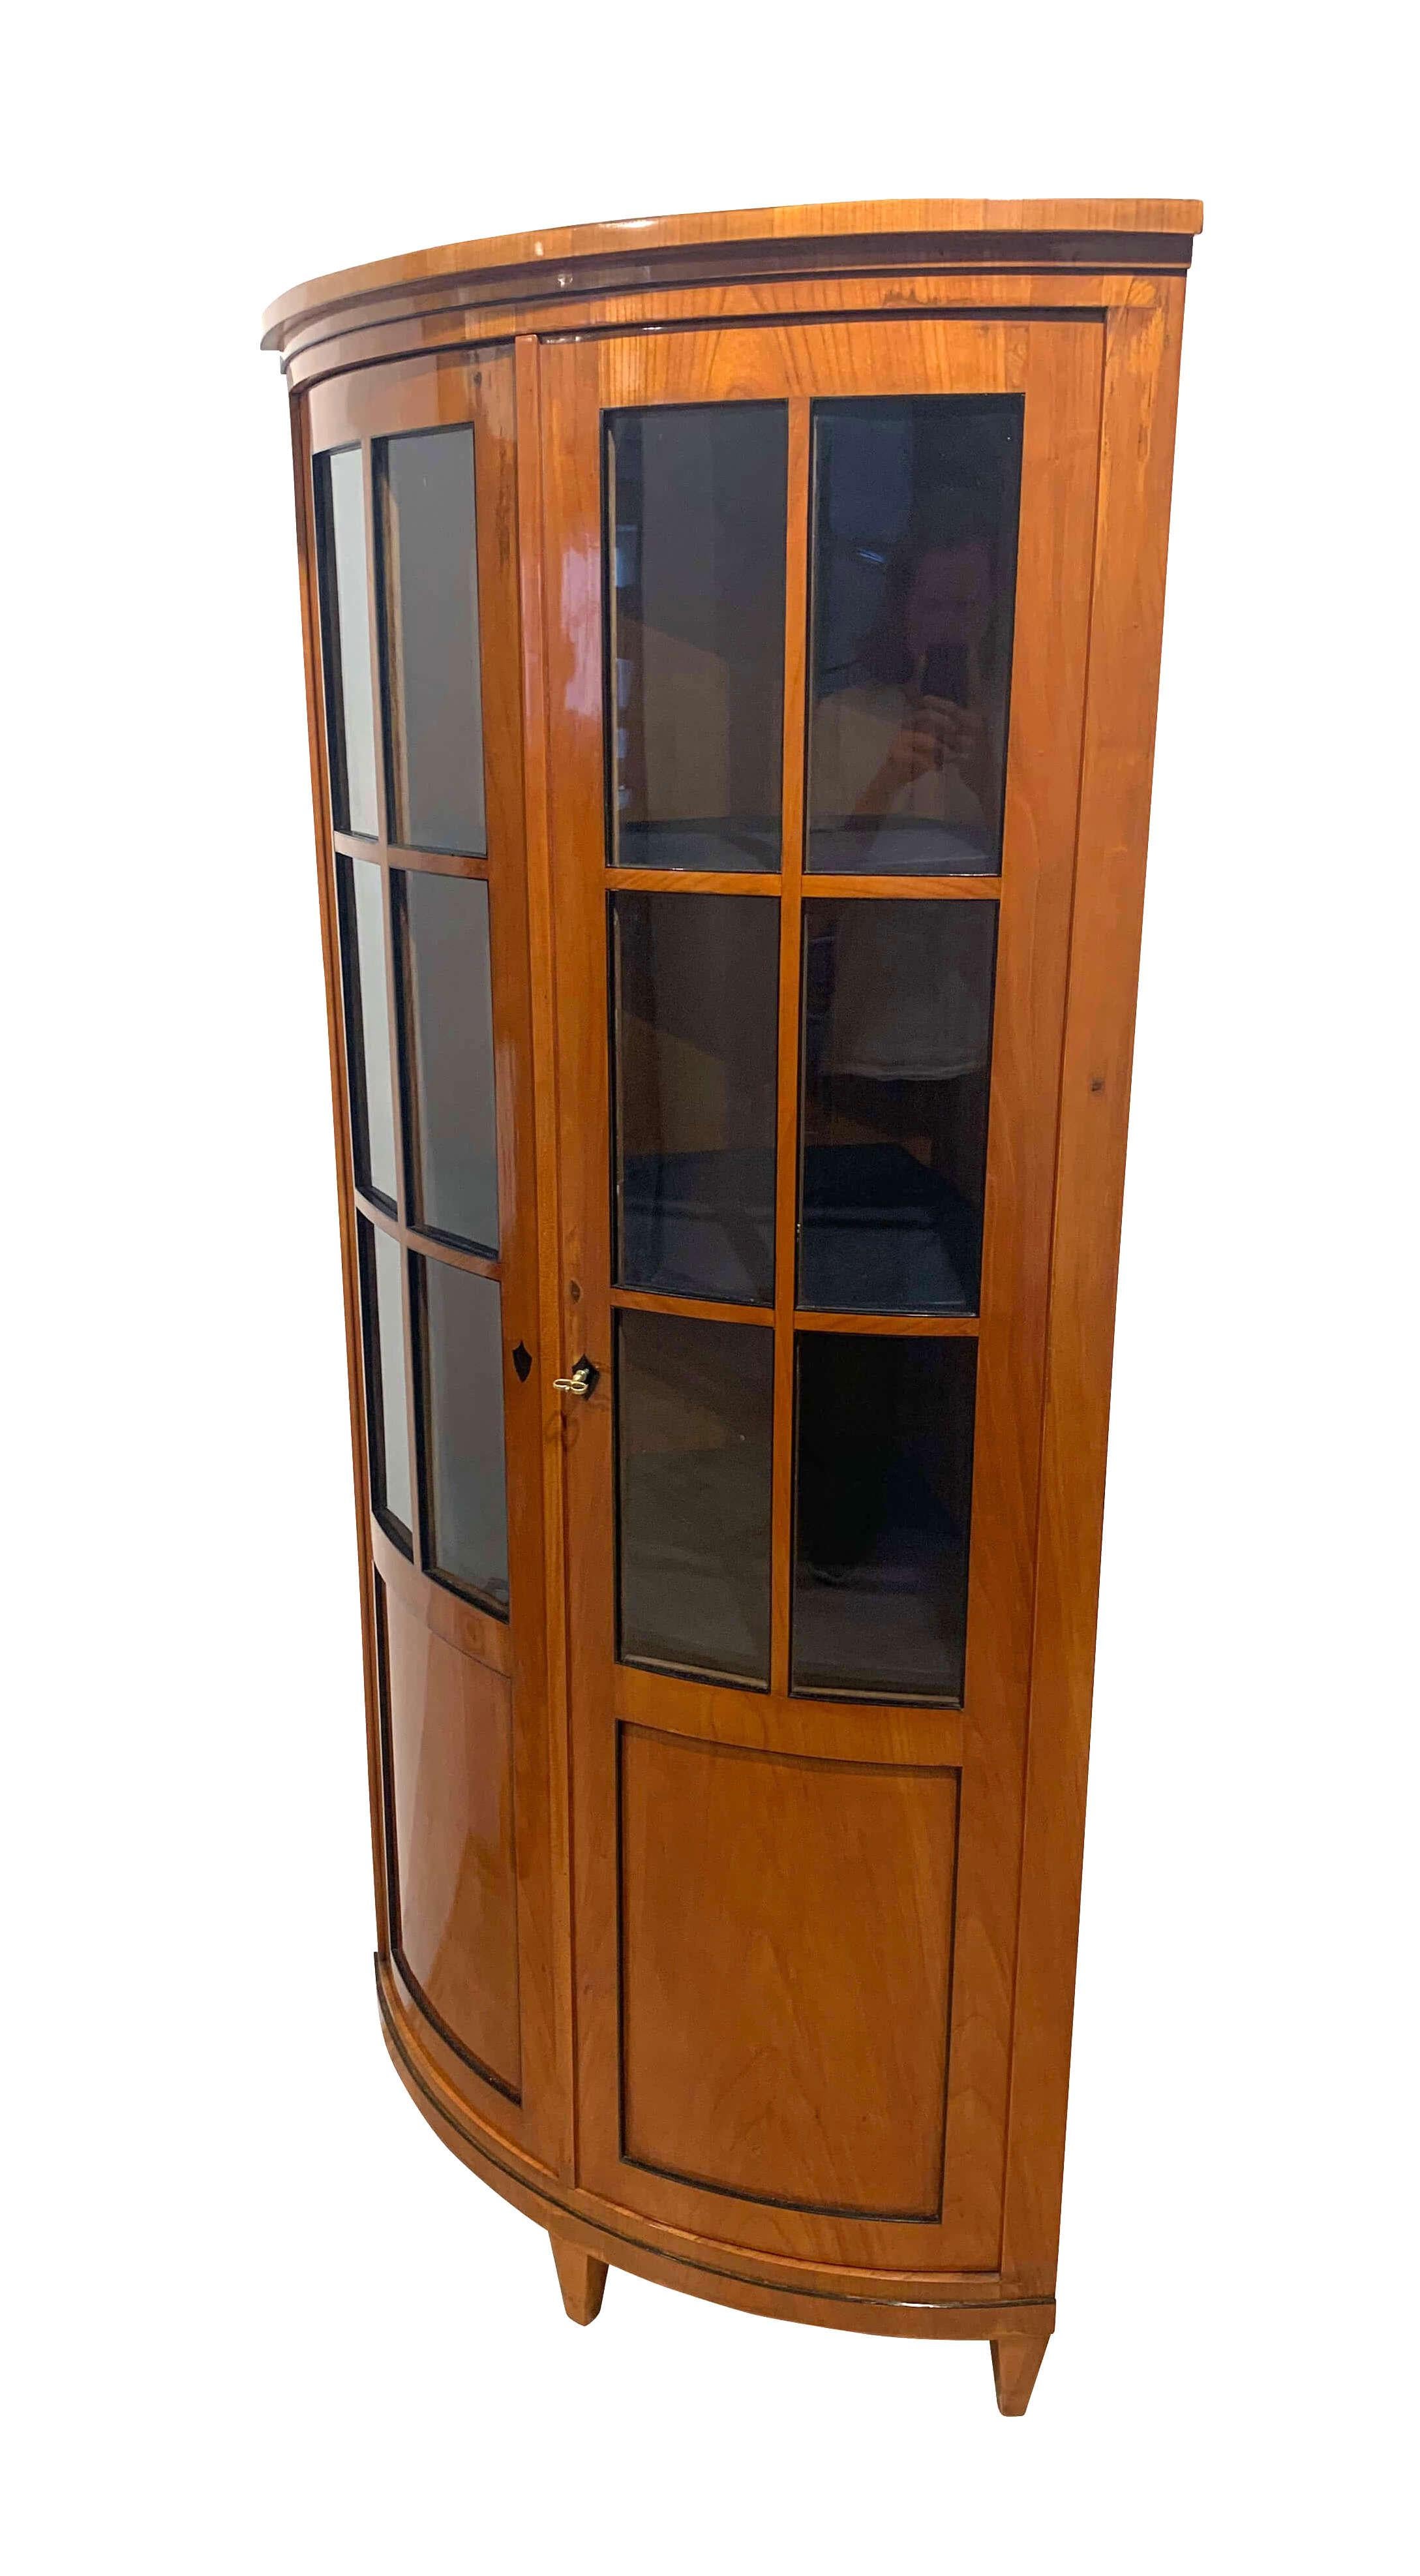 Lovely neoclassical corner showcase or vitrine from the second Biedermeier period, circa 1880.

Wood: Cherry veneer and solid wood, shellac hand-polished. Partly ebonized (inner) edges. Two lockable doors with six windows each. Coat of arms inlaid